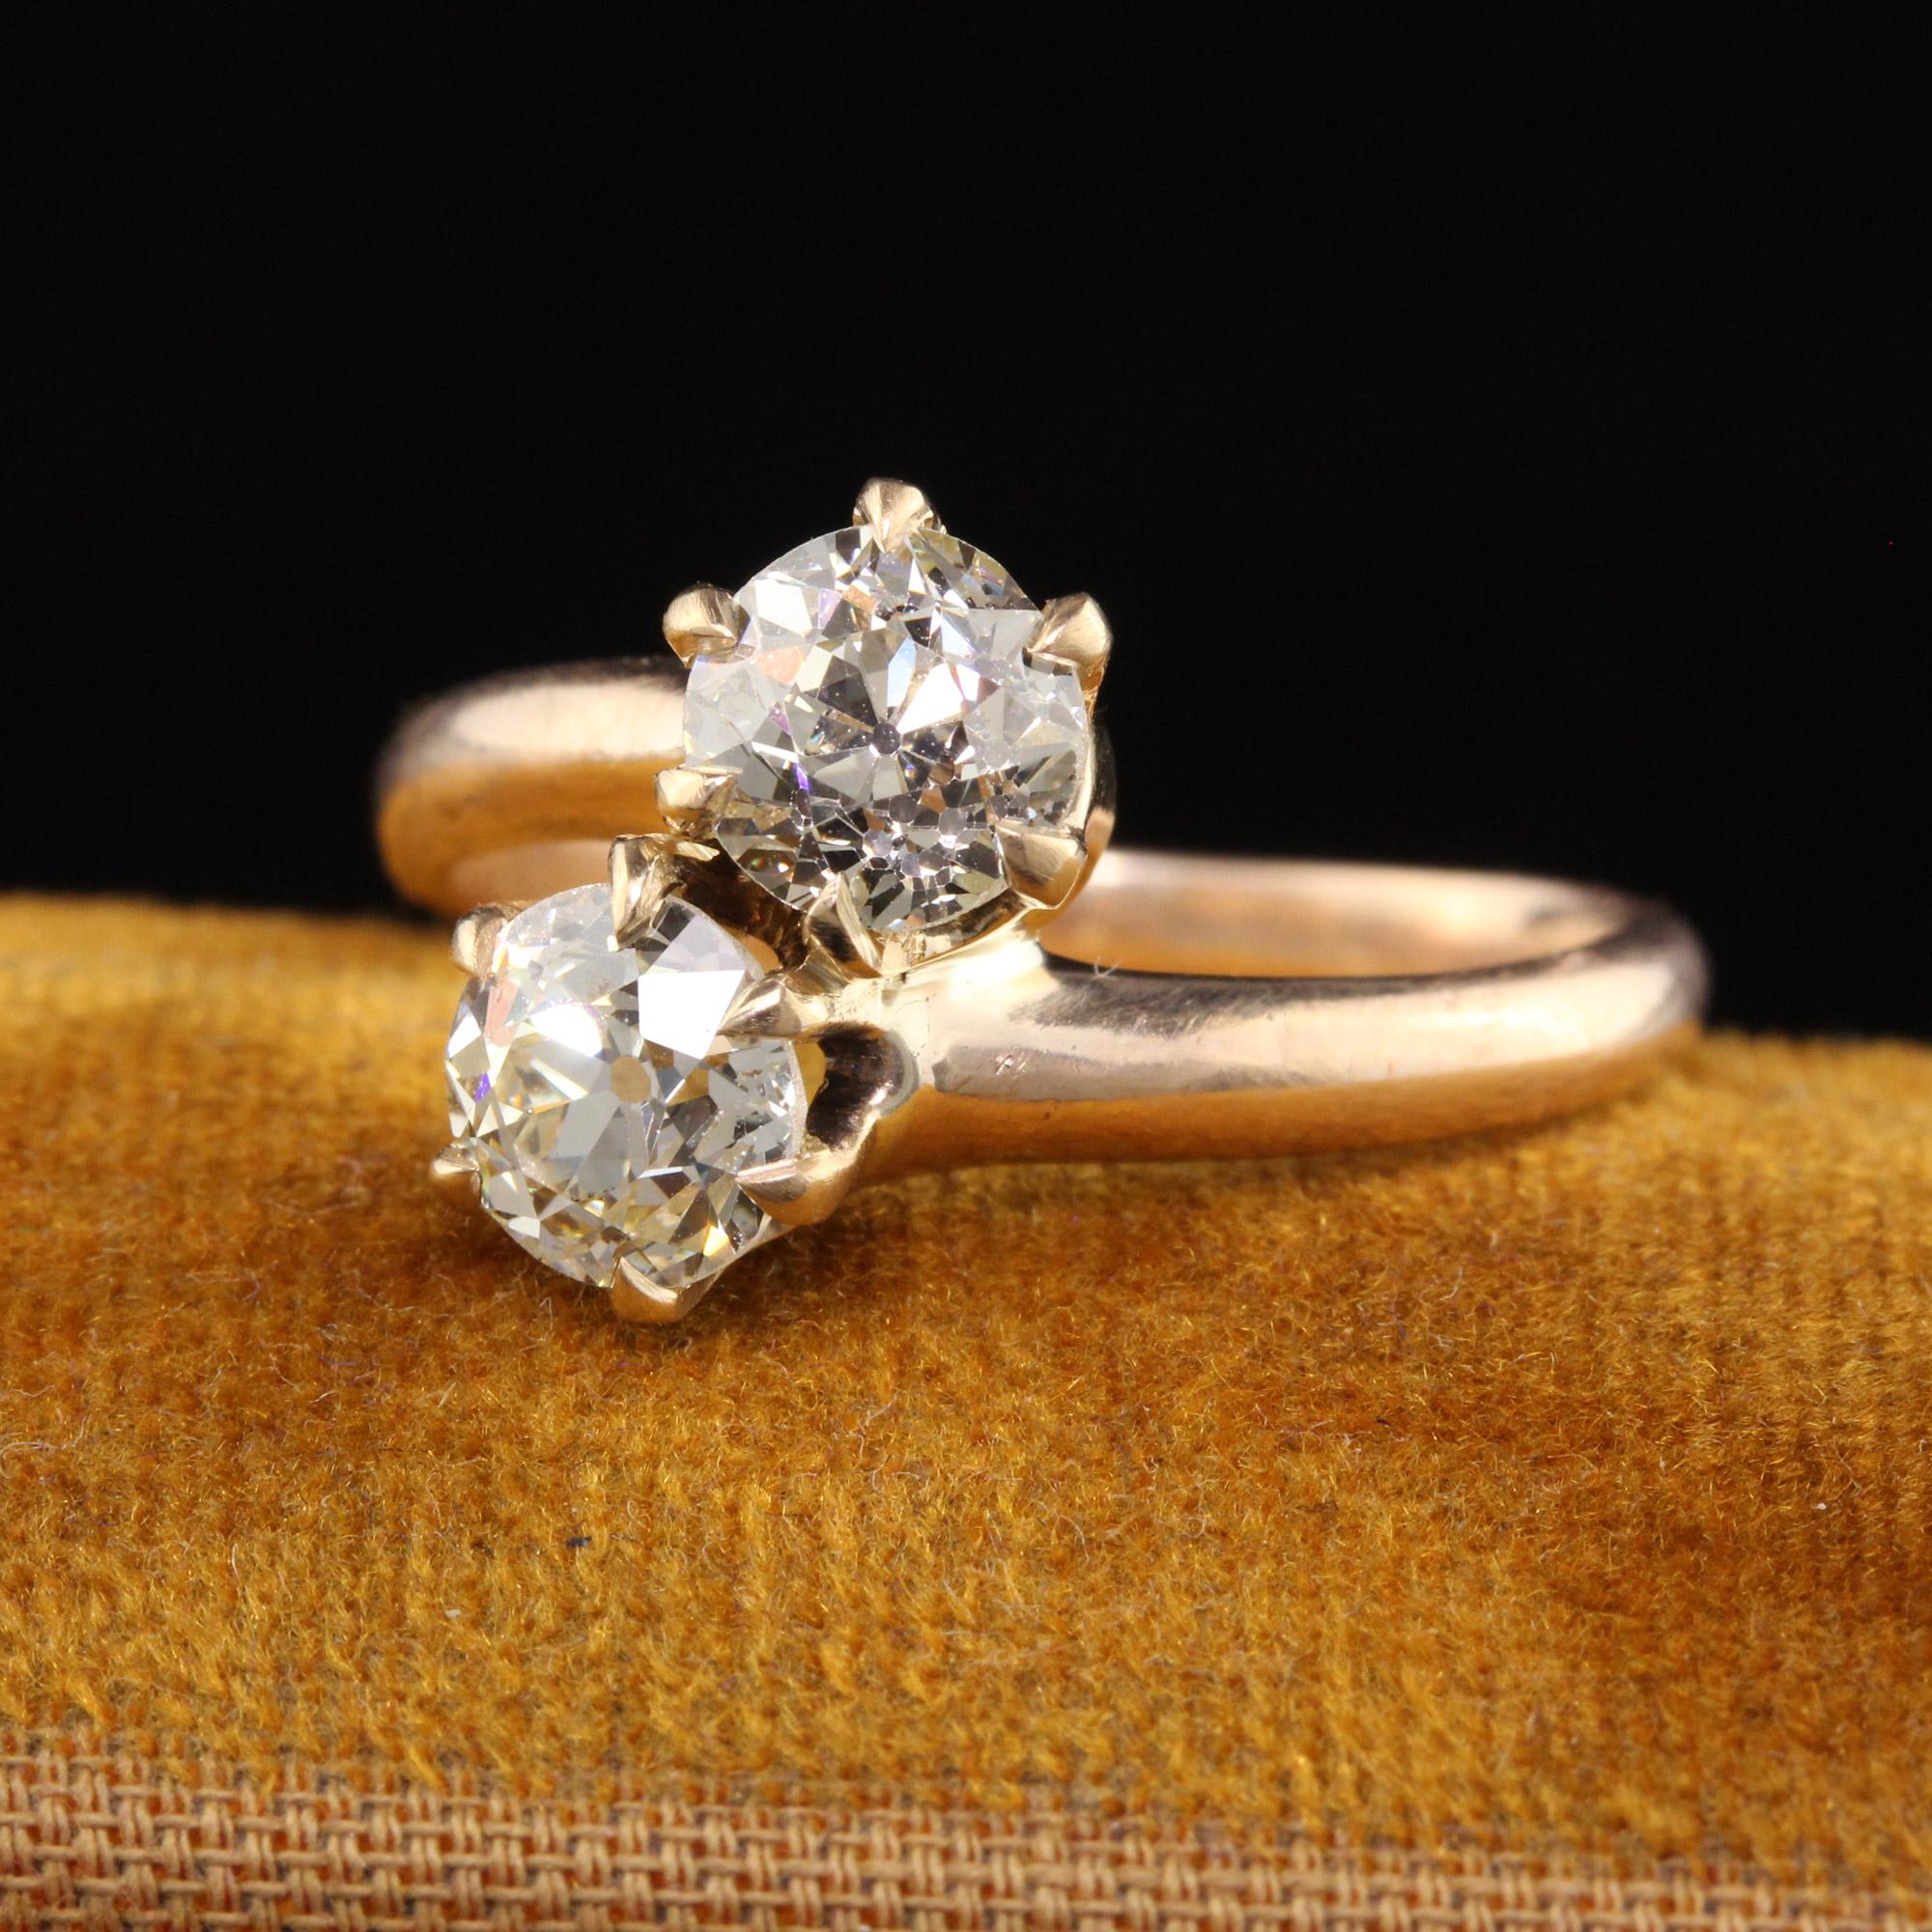 Beautiful Antique Victorian 14K Yellow Gold Old Mine Cut Diamond Toi et Moi Ring. This classic ring has two beautiful old mine cut diamonds set in yellow gold. The diamonds are very bright and sparkly.

Item #R1100

Metal: 14K Yellow Gold

Weight: